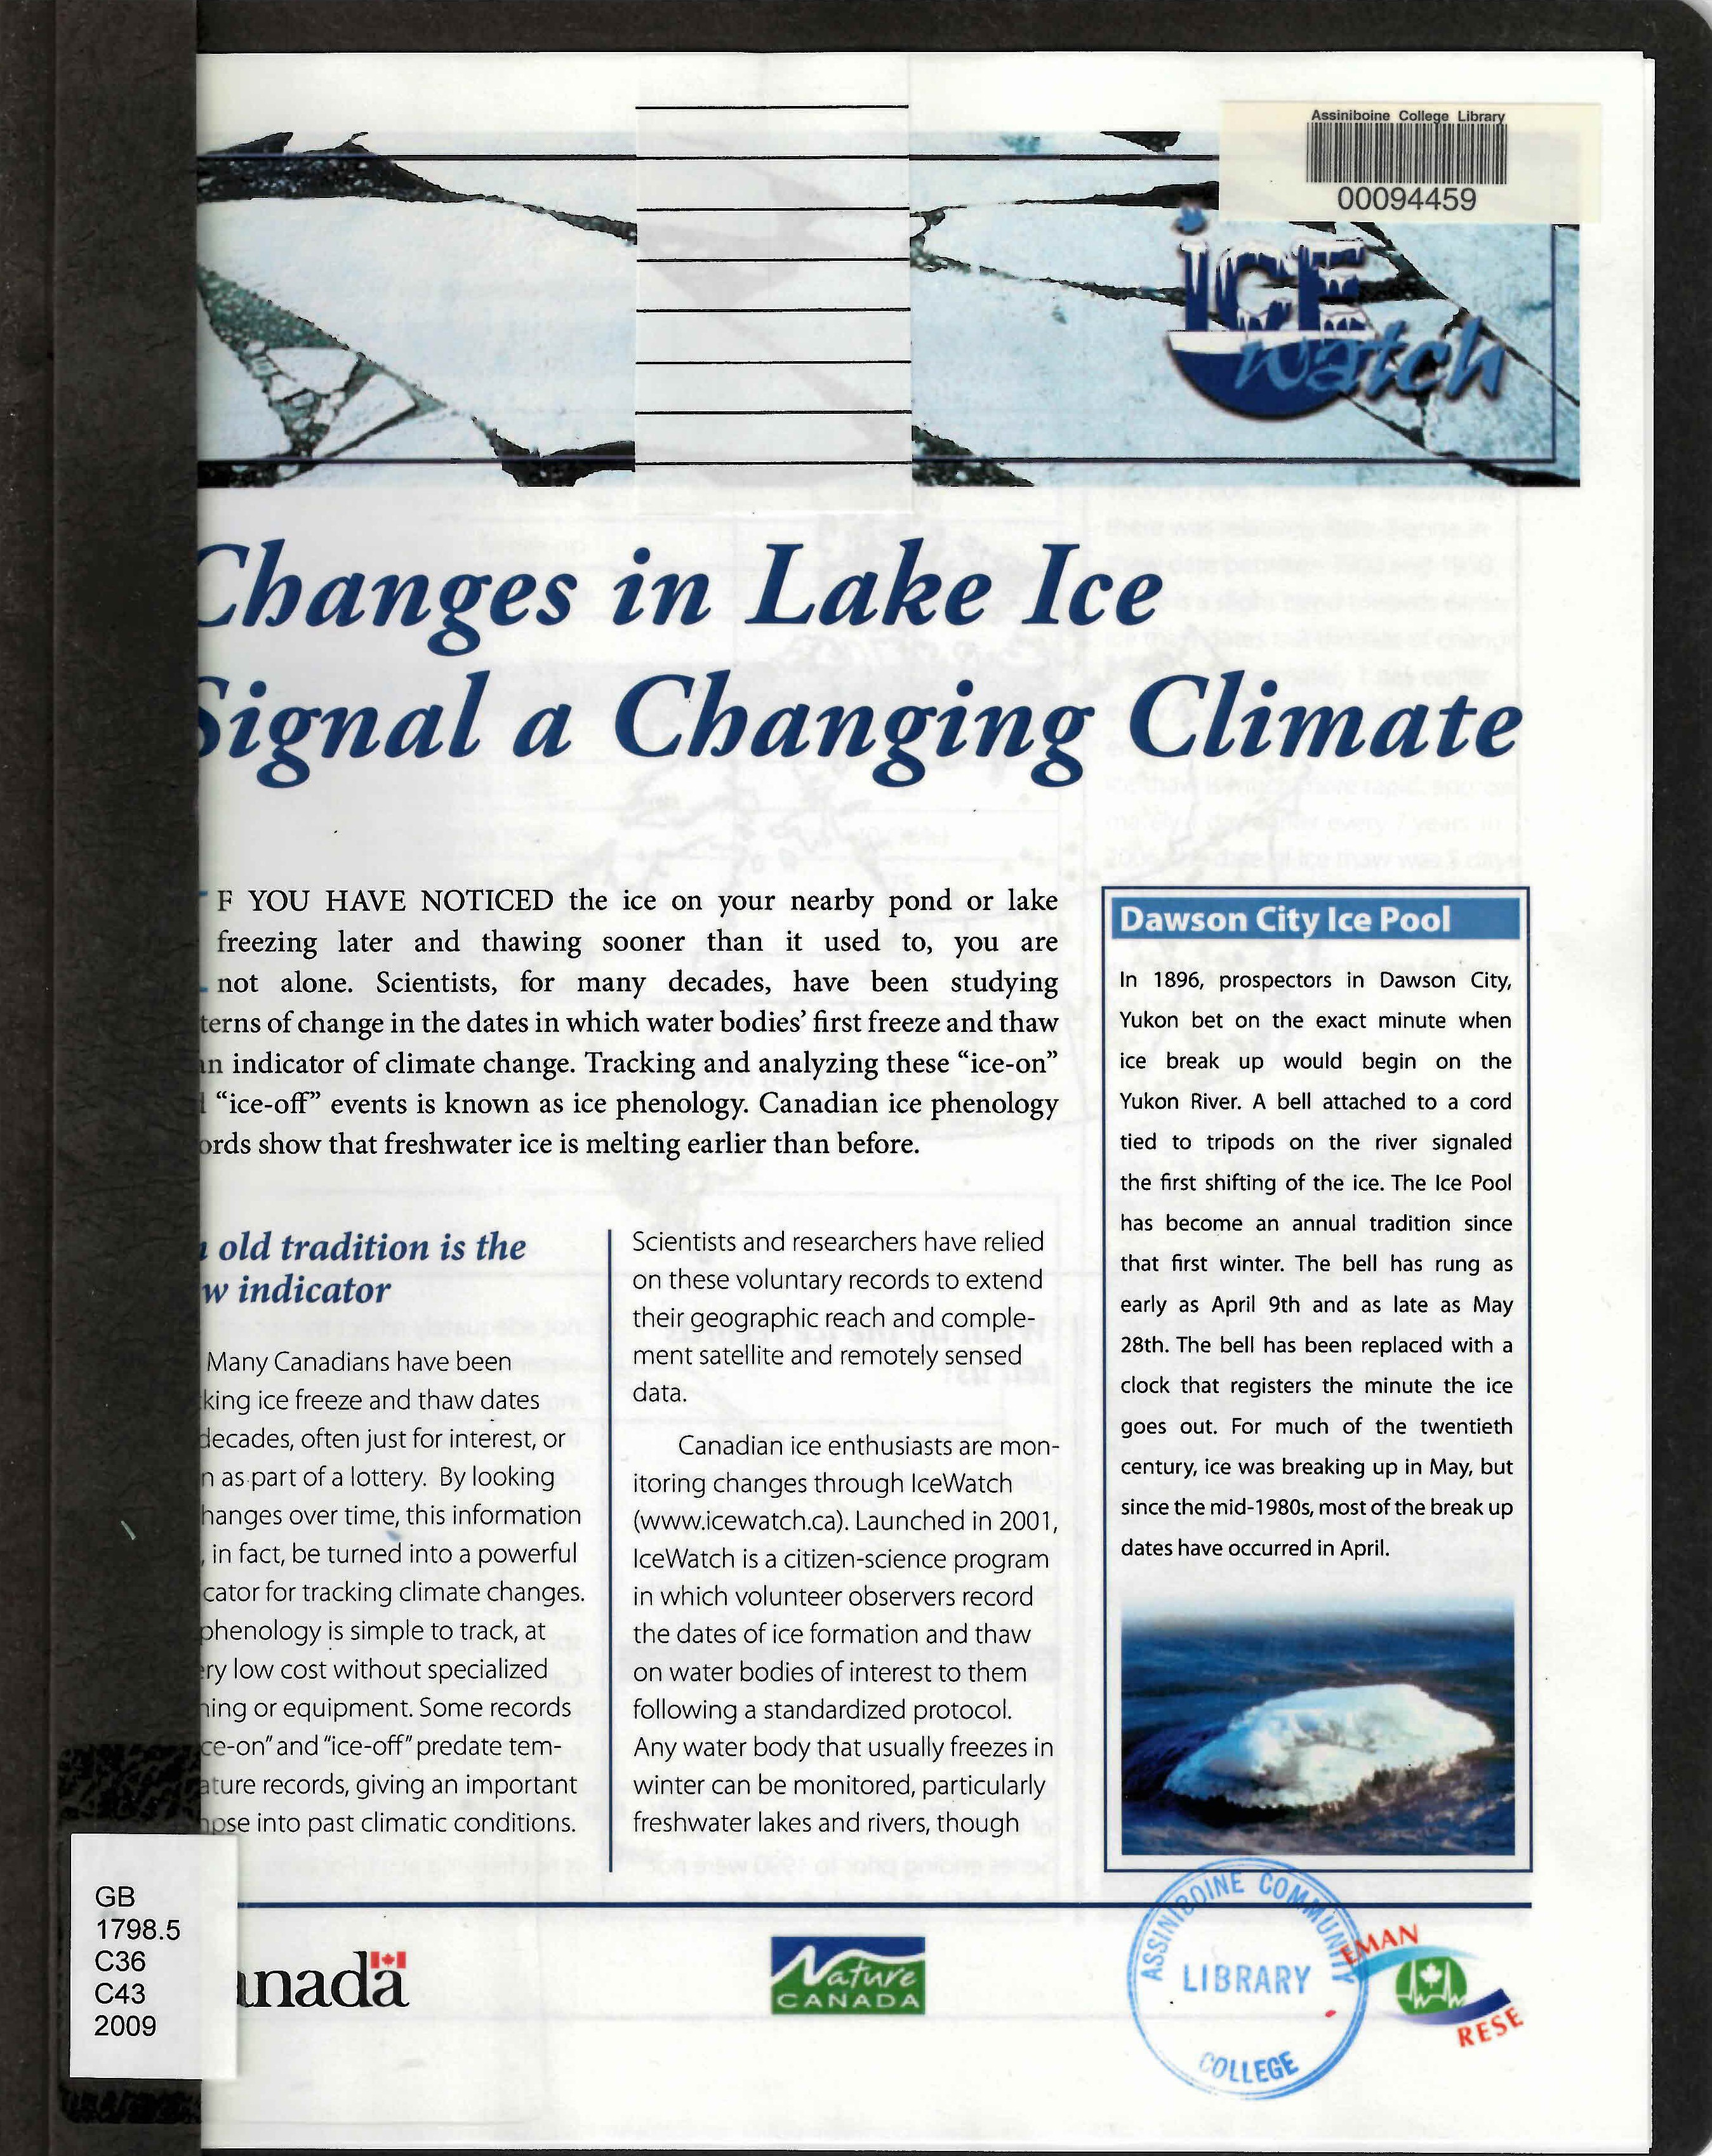 Changes in lake ice signal a changing climate.